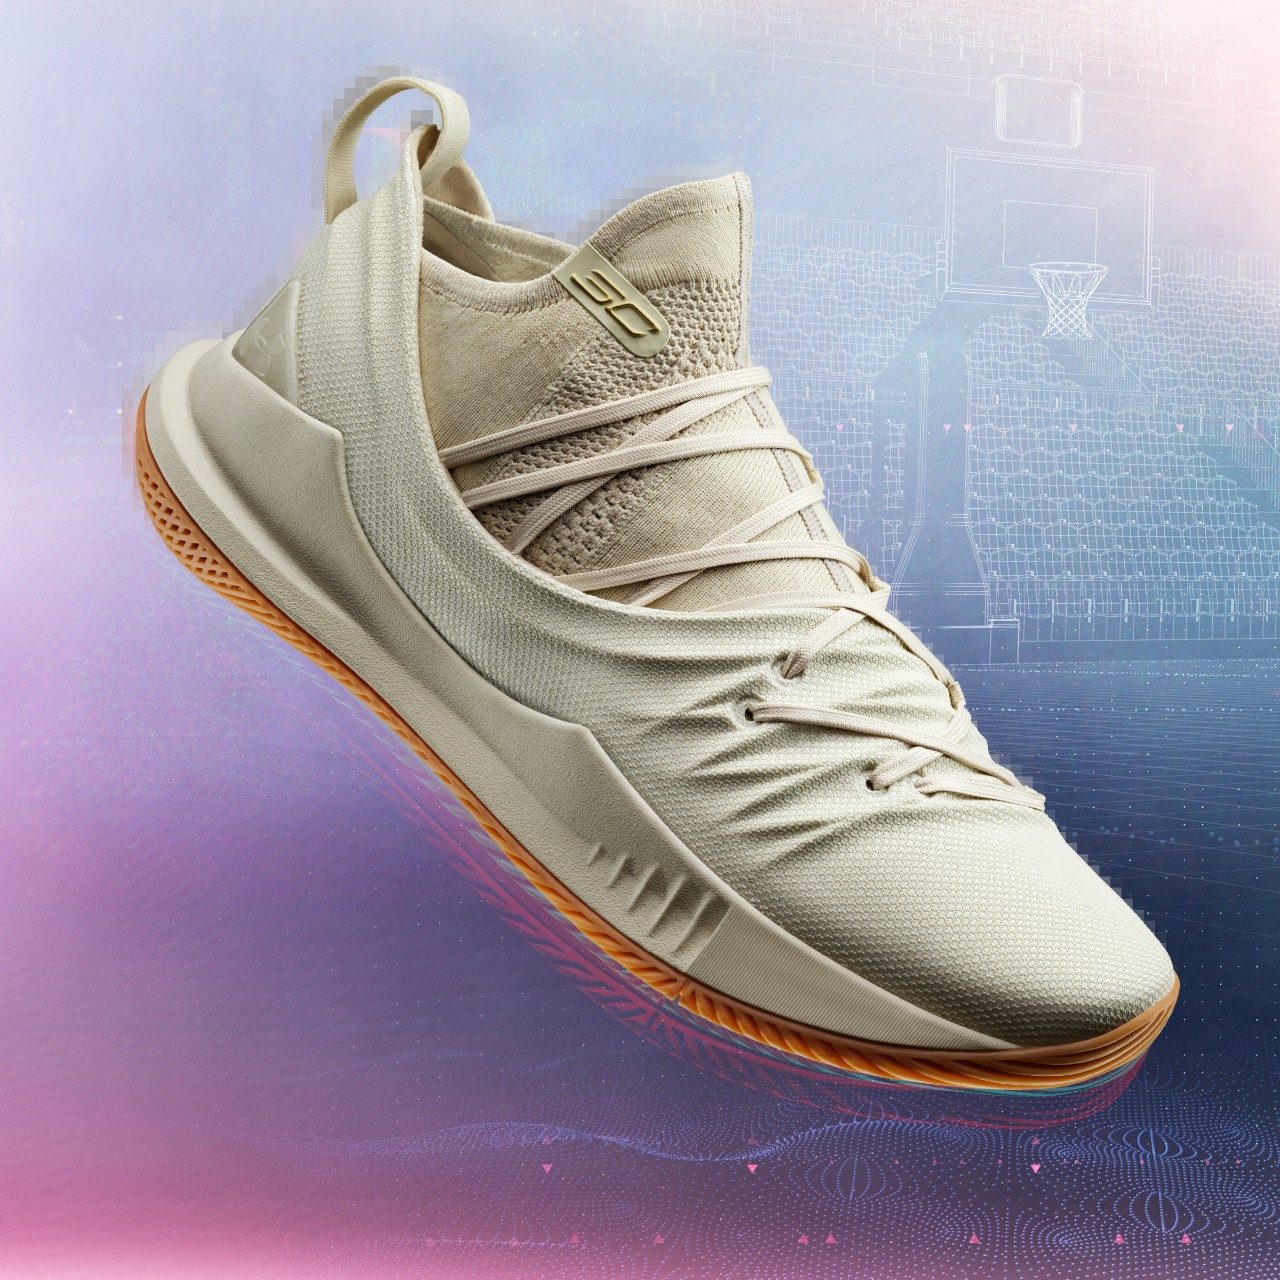 The Curry 5 tan colorway will be available in limited pairs around the globe on Sept. 7